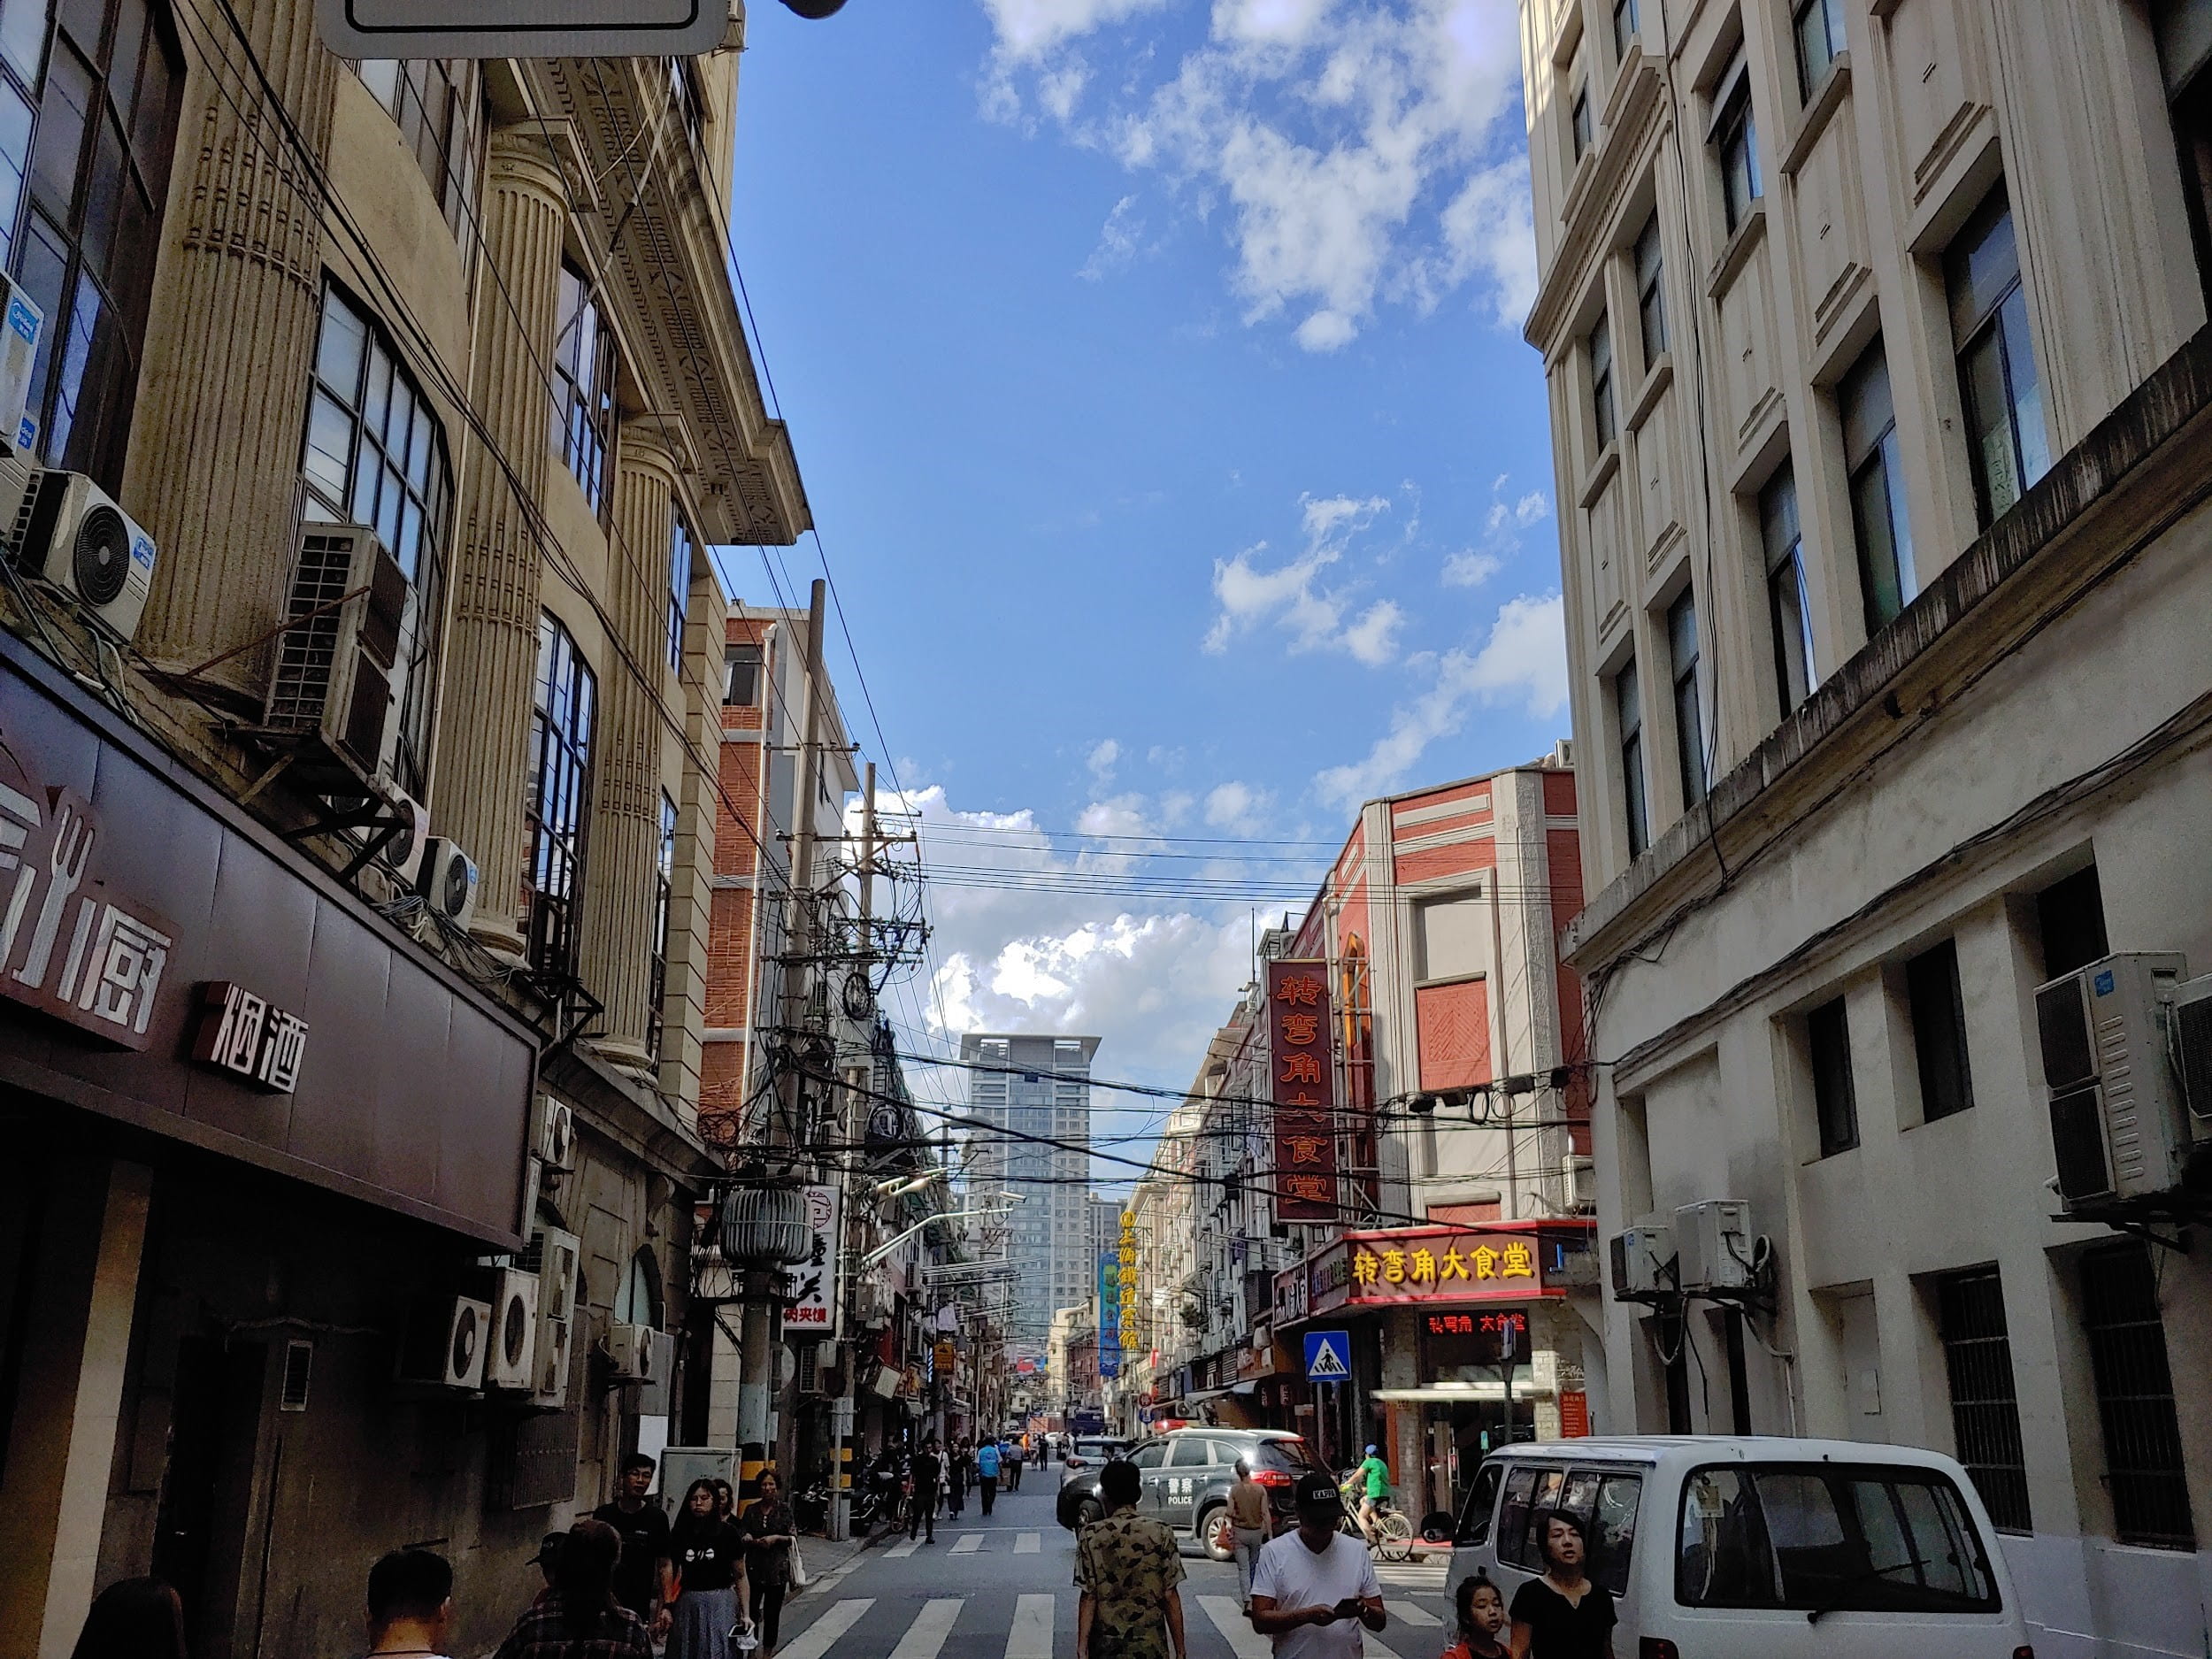 Looking down a street in Shanghai with buildings on both sides and blue sky and clouds in the background